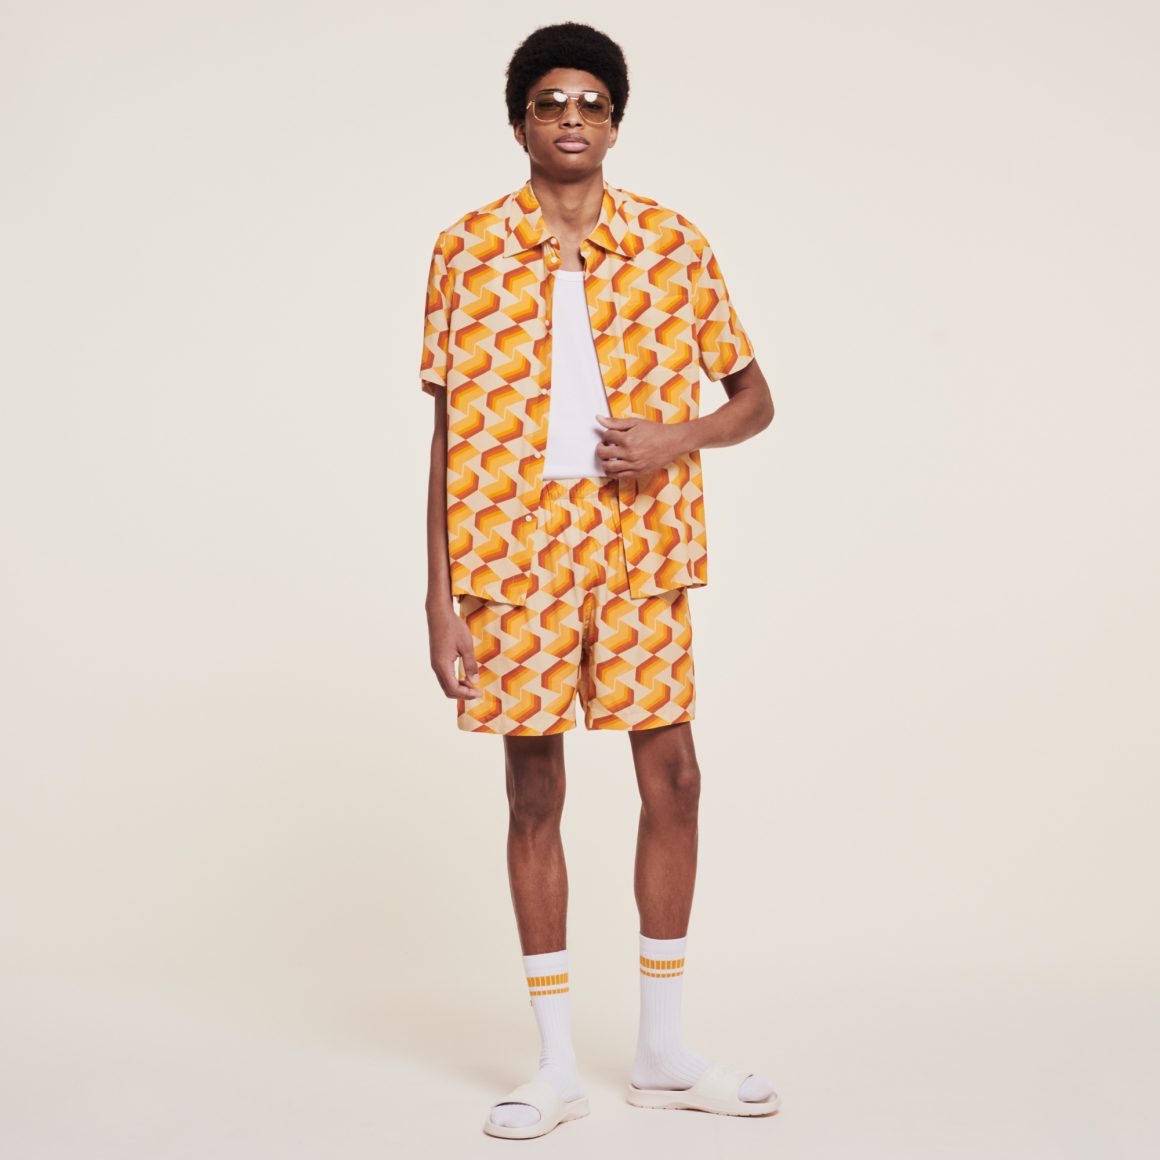 Lacoste X Ricky Regal: Bruno Mars Channels Alter Ego For First Clothing Line Launch